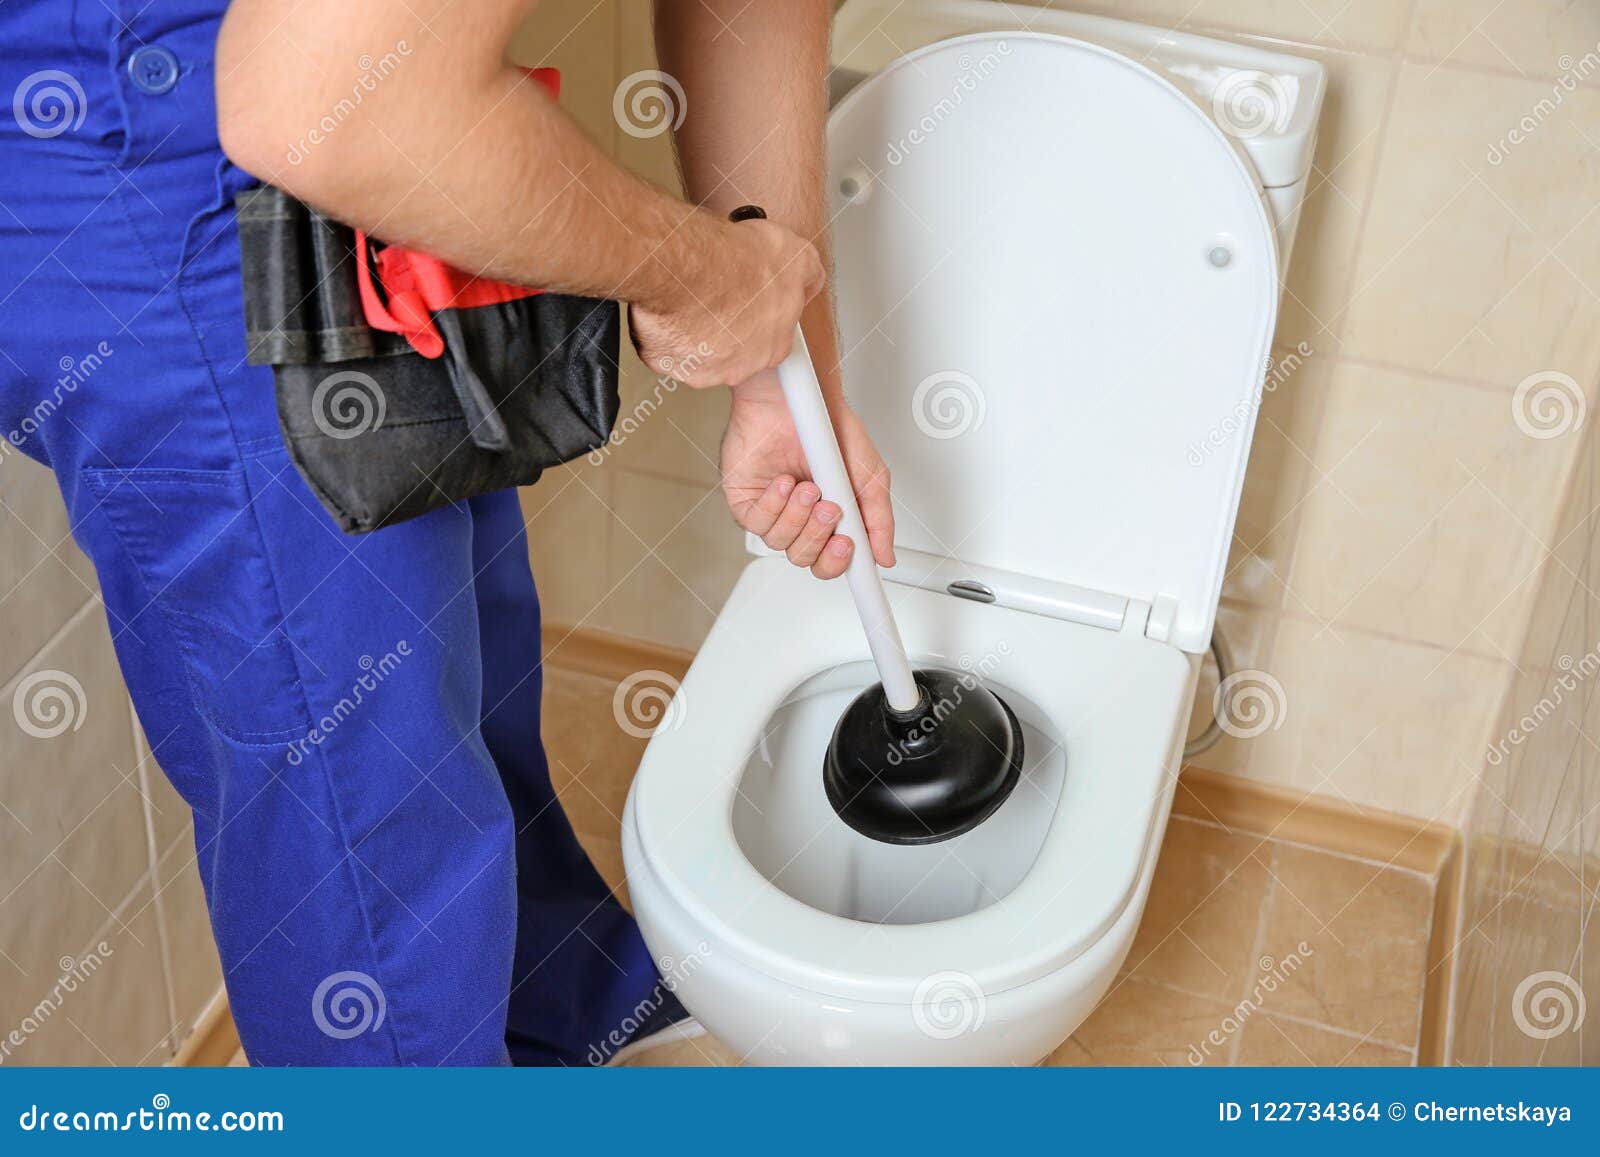 Plunger Inside A Bathroom Toilet High-Res Stock Photo 